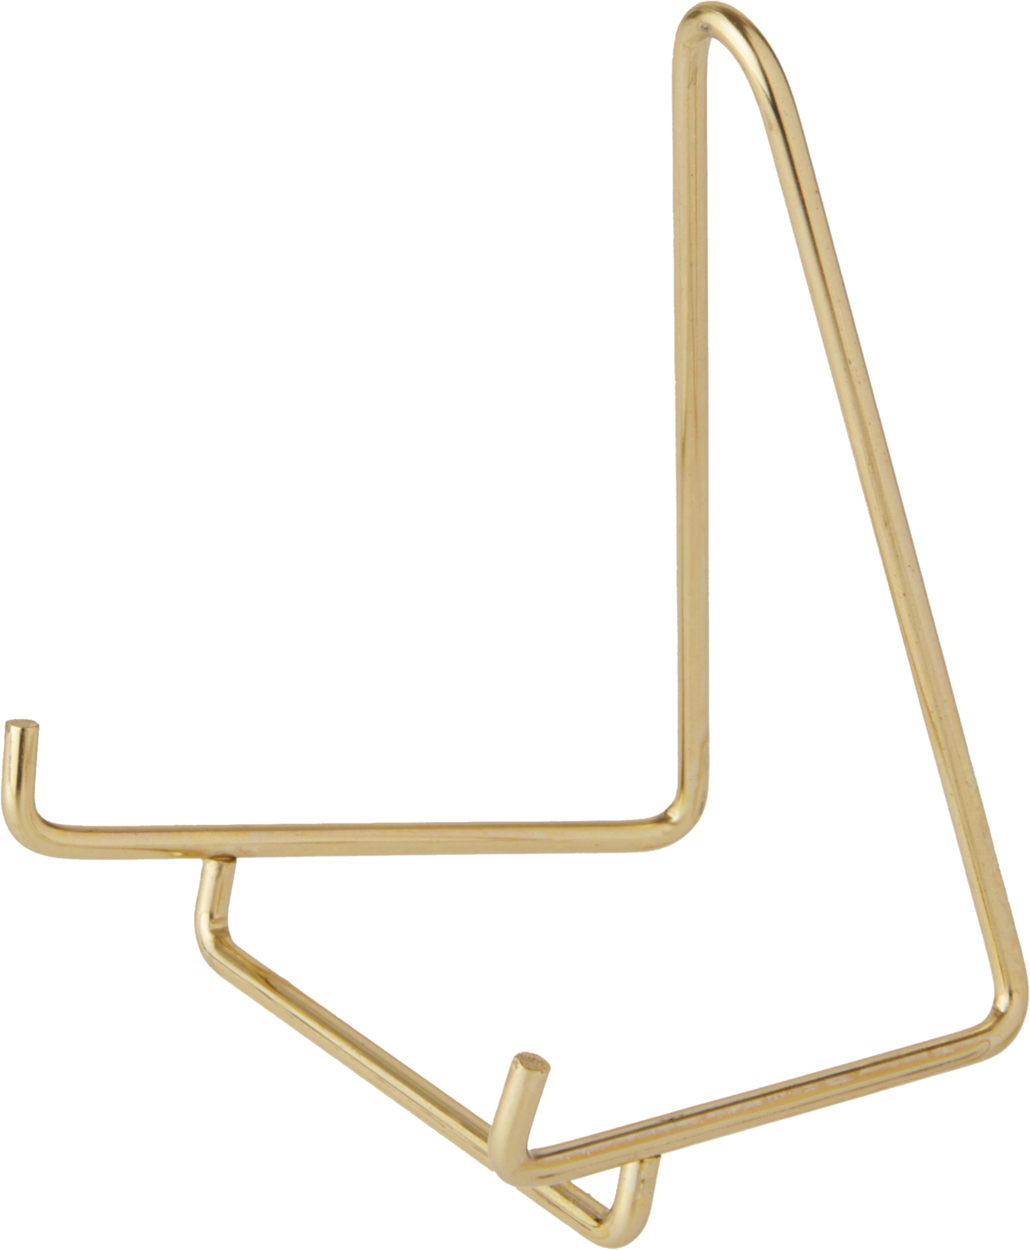 Bards Gold-Toned Wire Stand 4 H x 3.25 W x 3 D Pack of 2